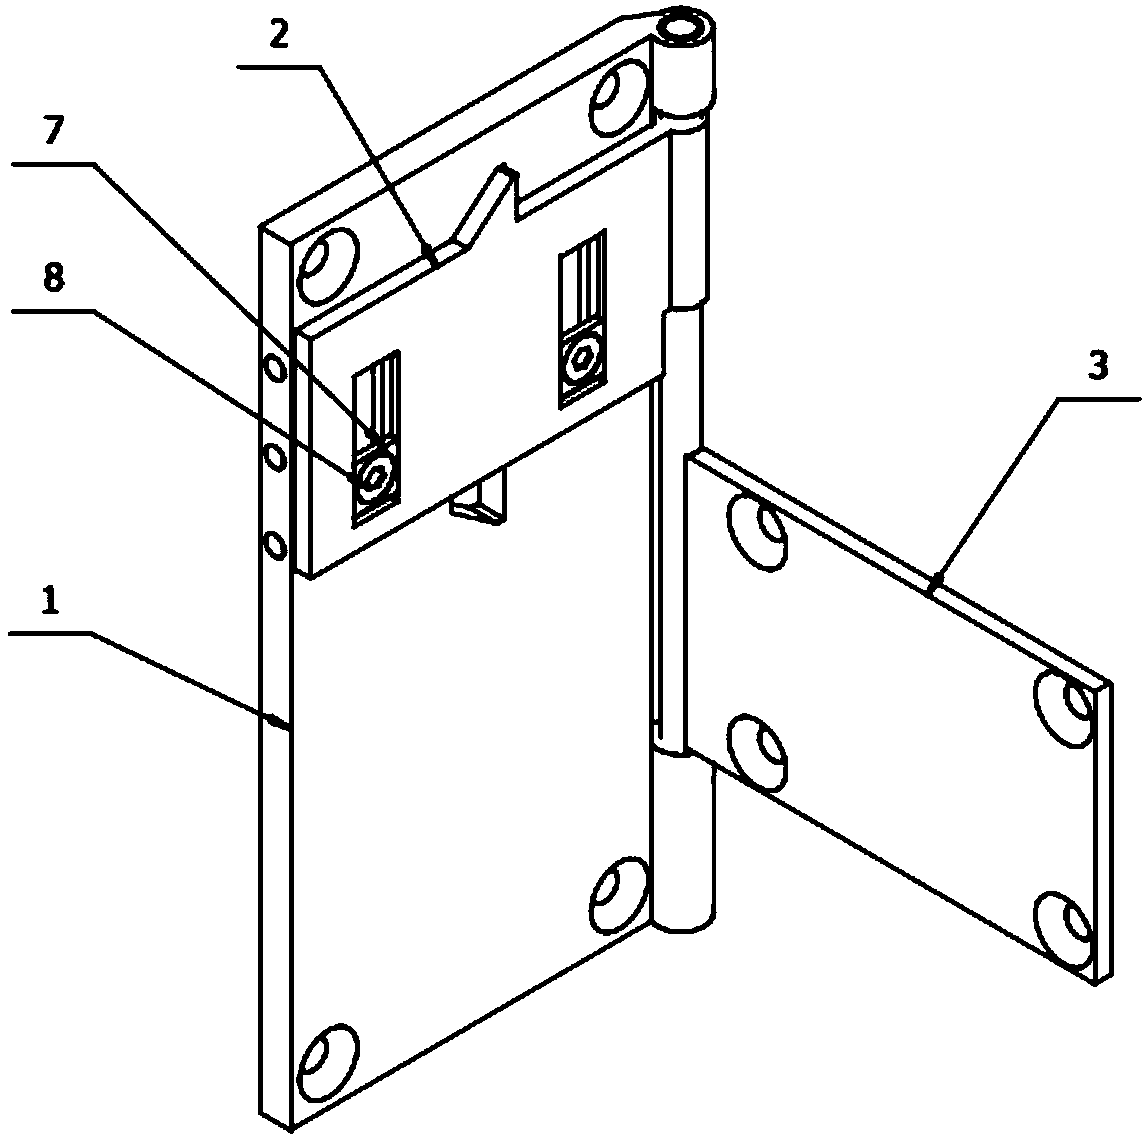 Multi-pose stop control hinge lock and door provided with same